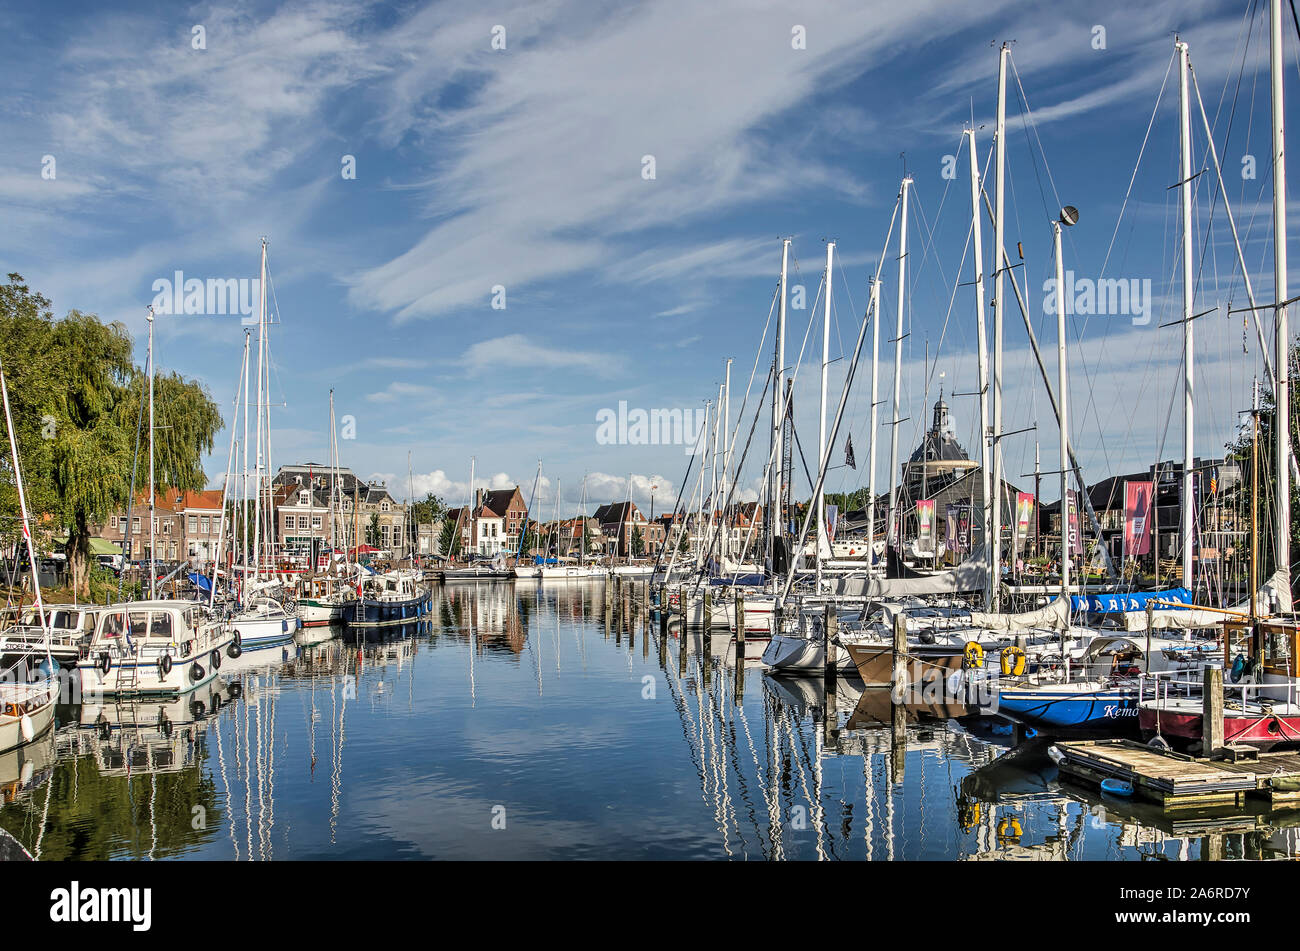 Enkhuizen, The Netherlands, September 13, 2019: blue sky, modern yachts and historic facades reflect in the mirror-like water of the inner harbour mar Stock Photo